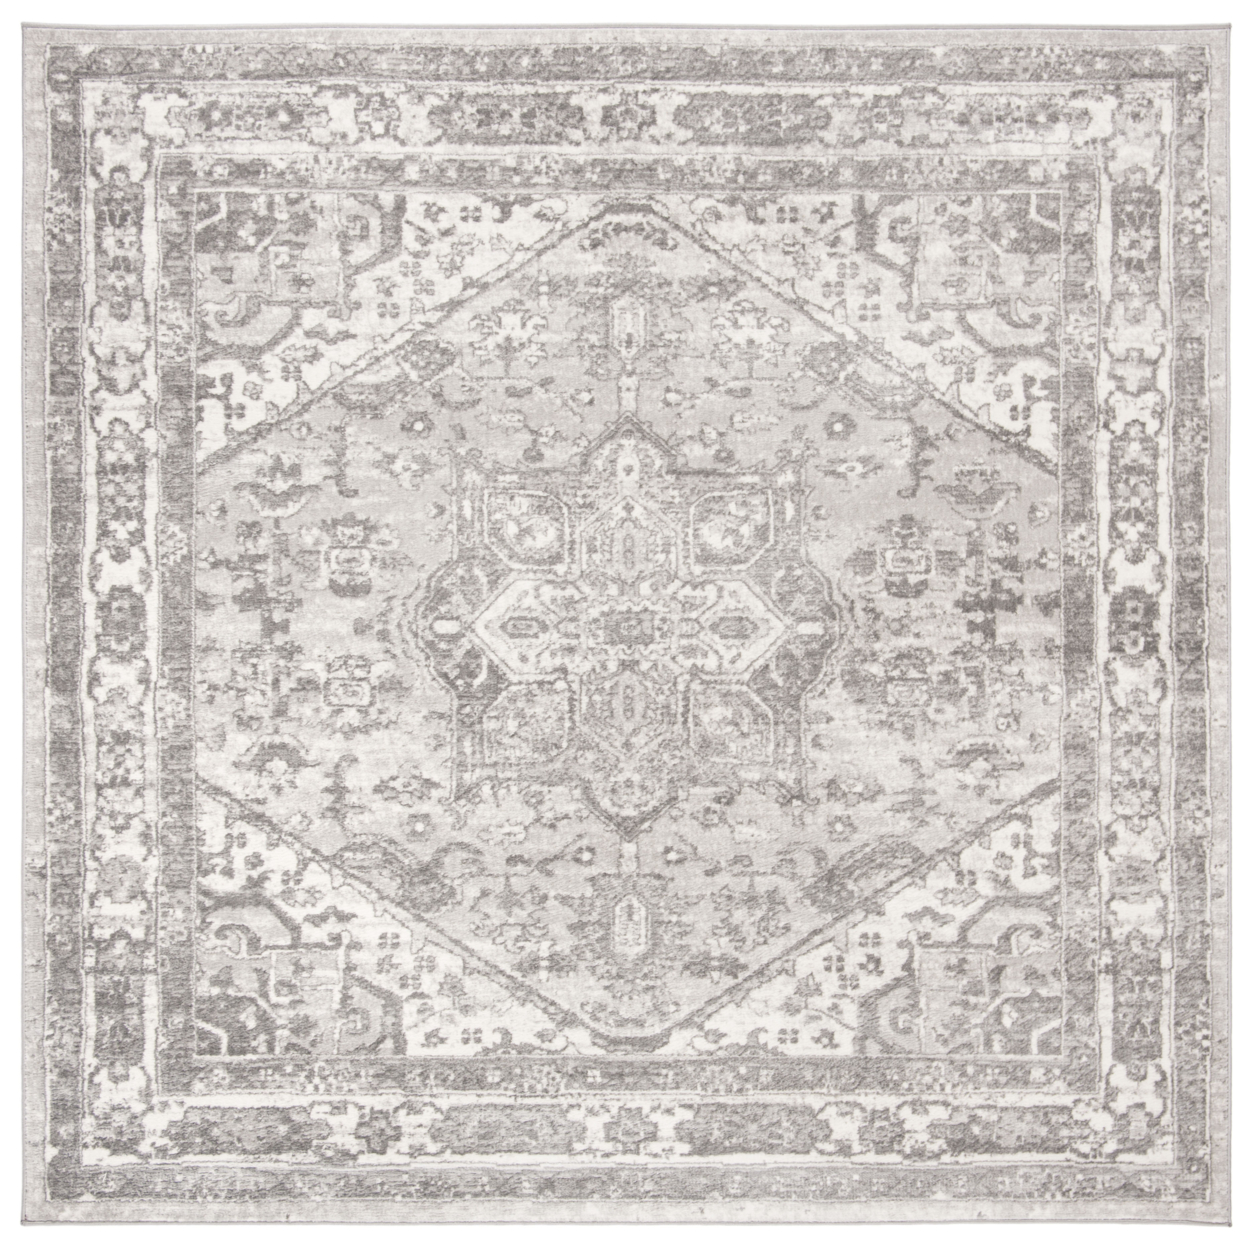 SAFAVIEH Brentwood Collection BNT852B Cream / Grey Rug - 10' Square